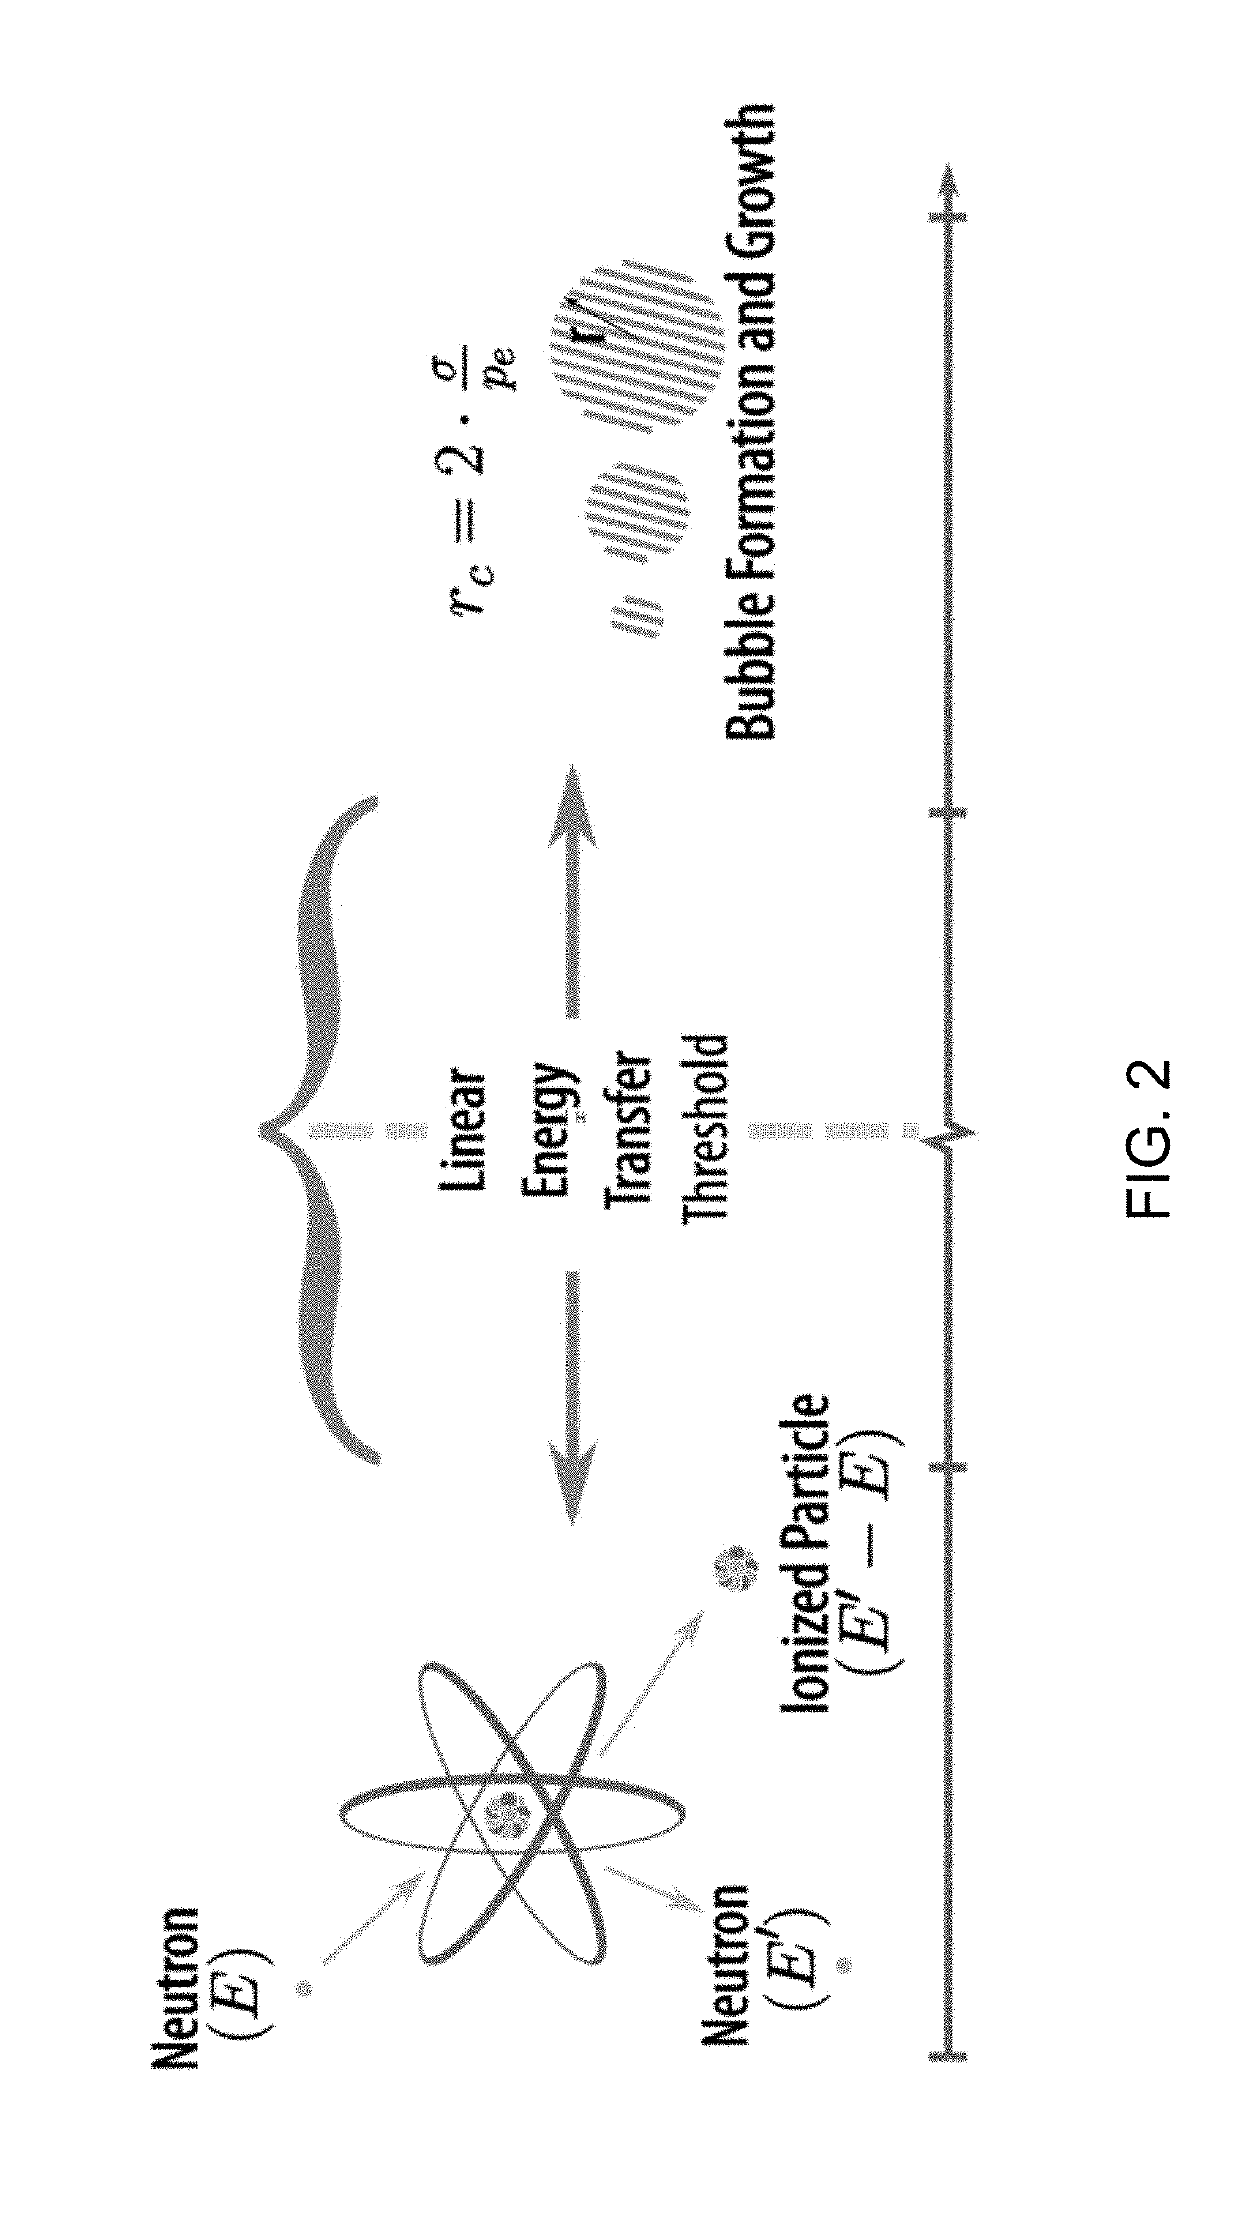 Systems and methods for interrogating containers for special nuclear materials